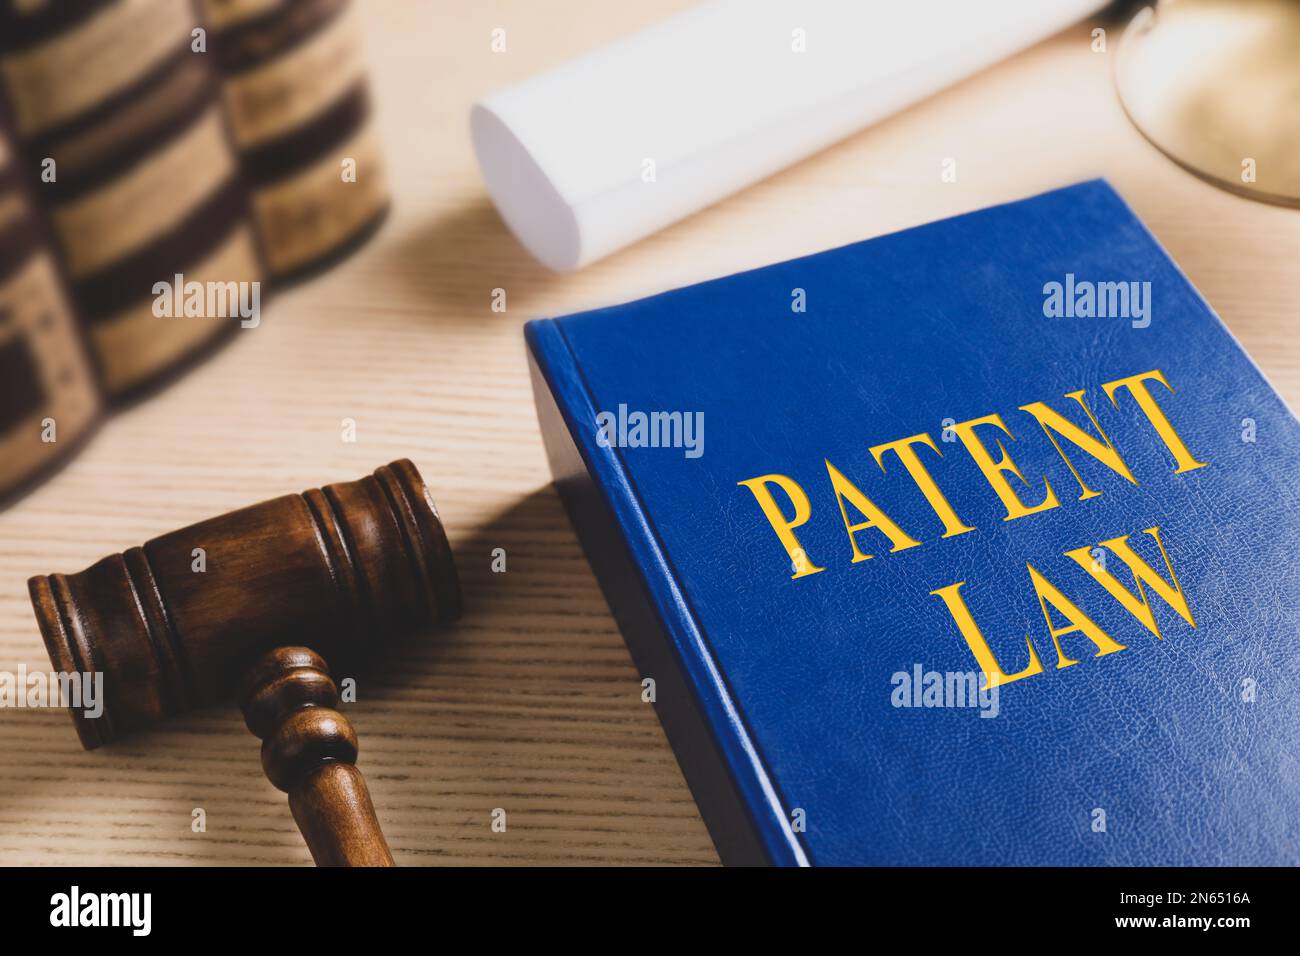 Patent Law book and gavel on wooden table Stock Photo